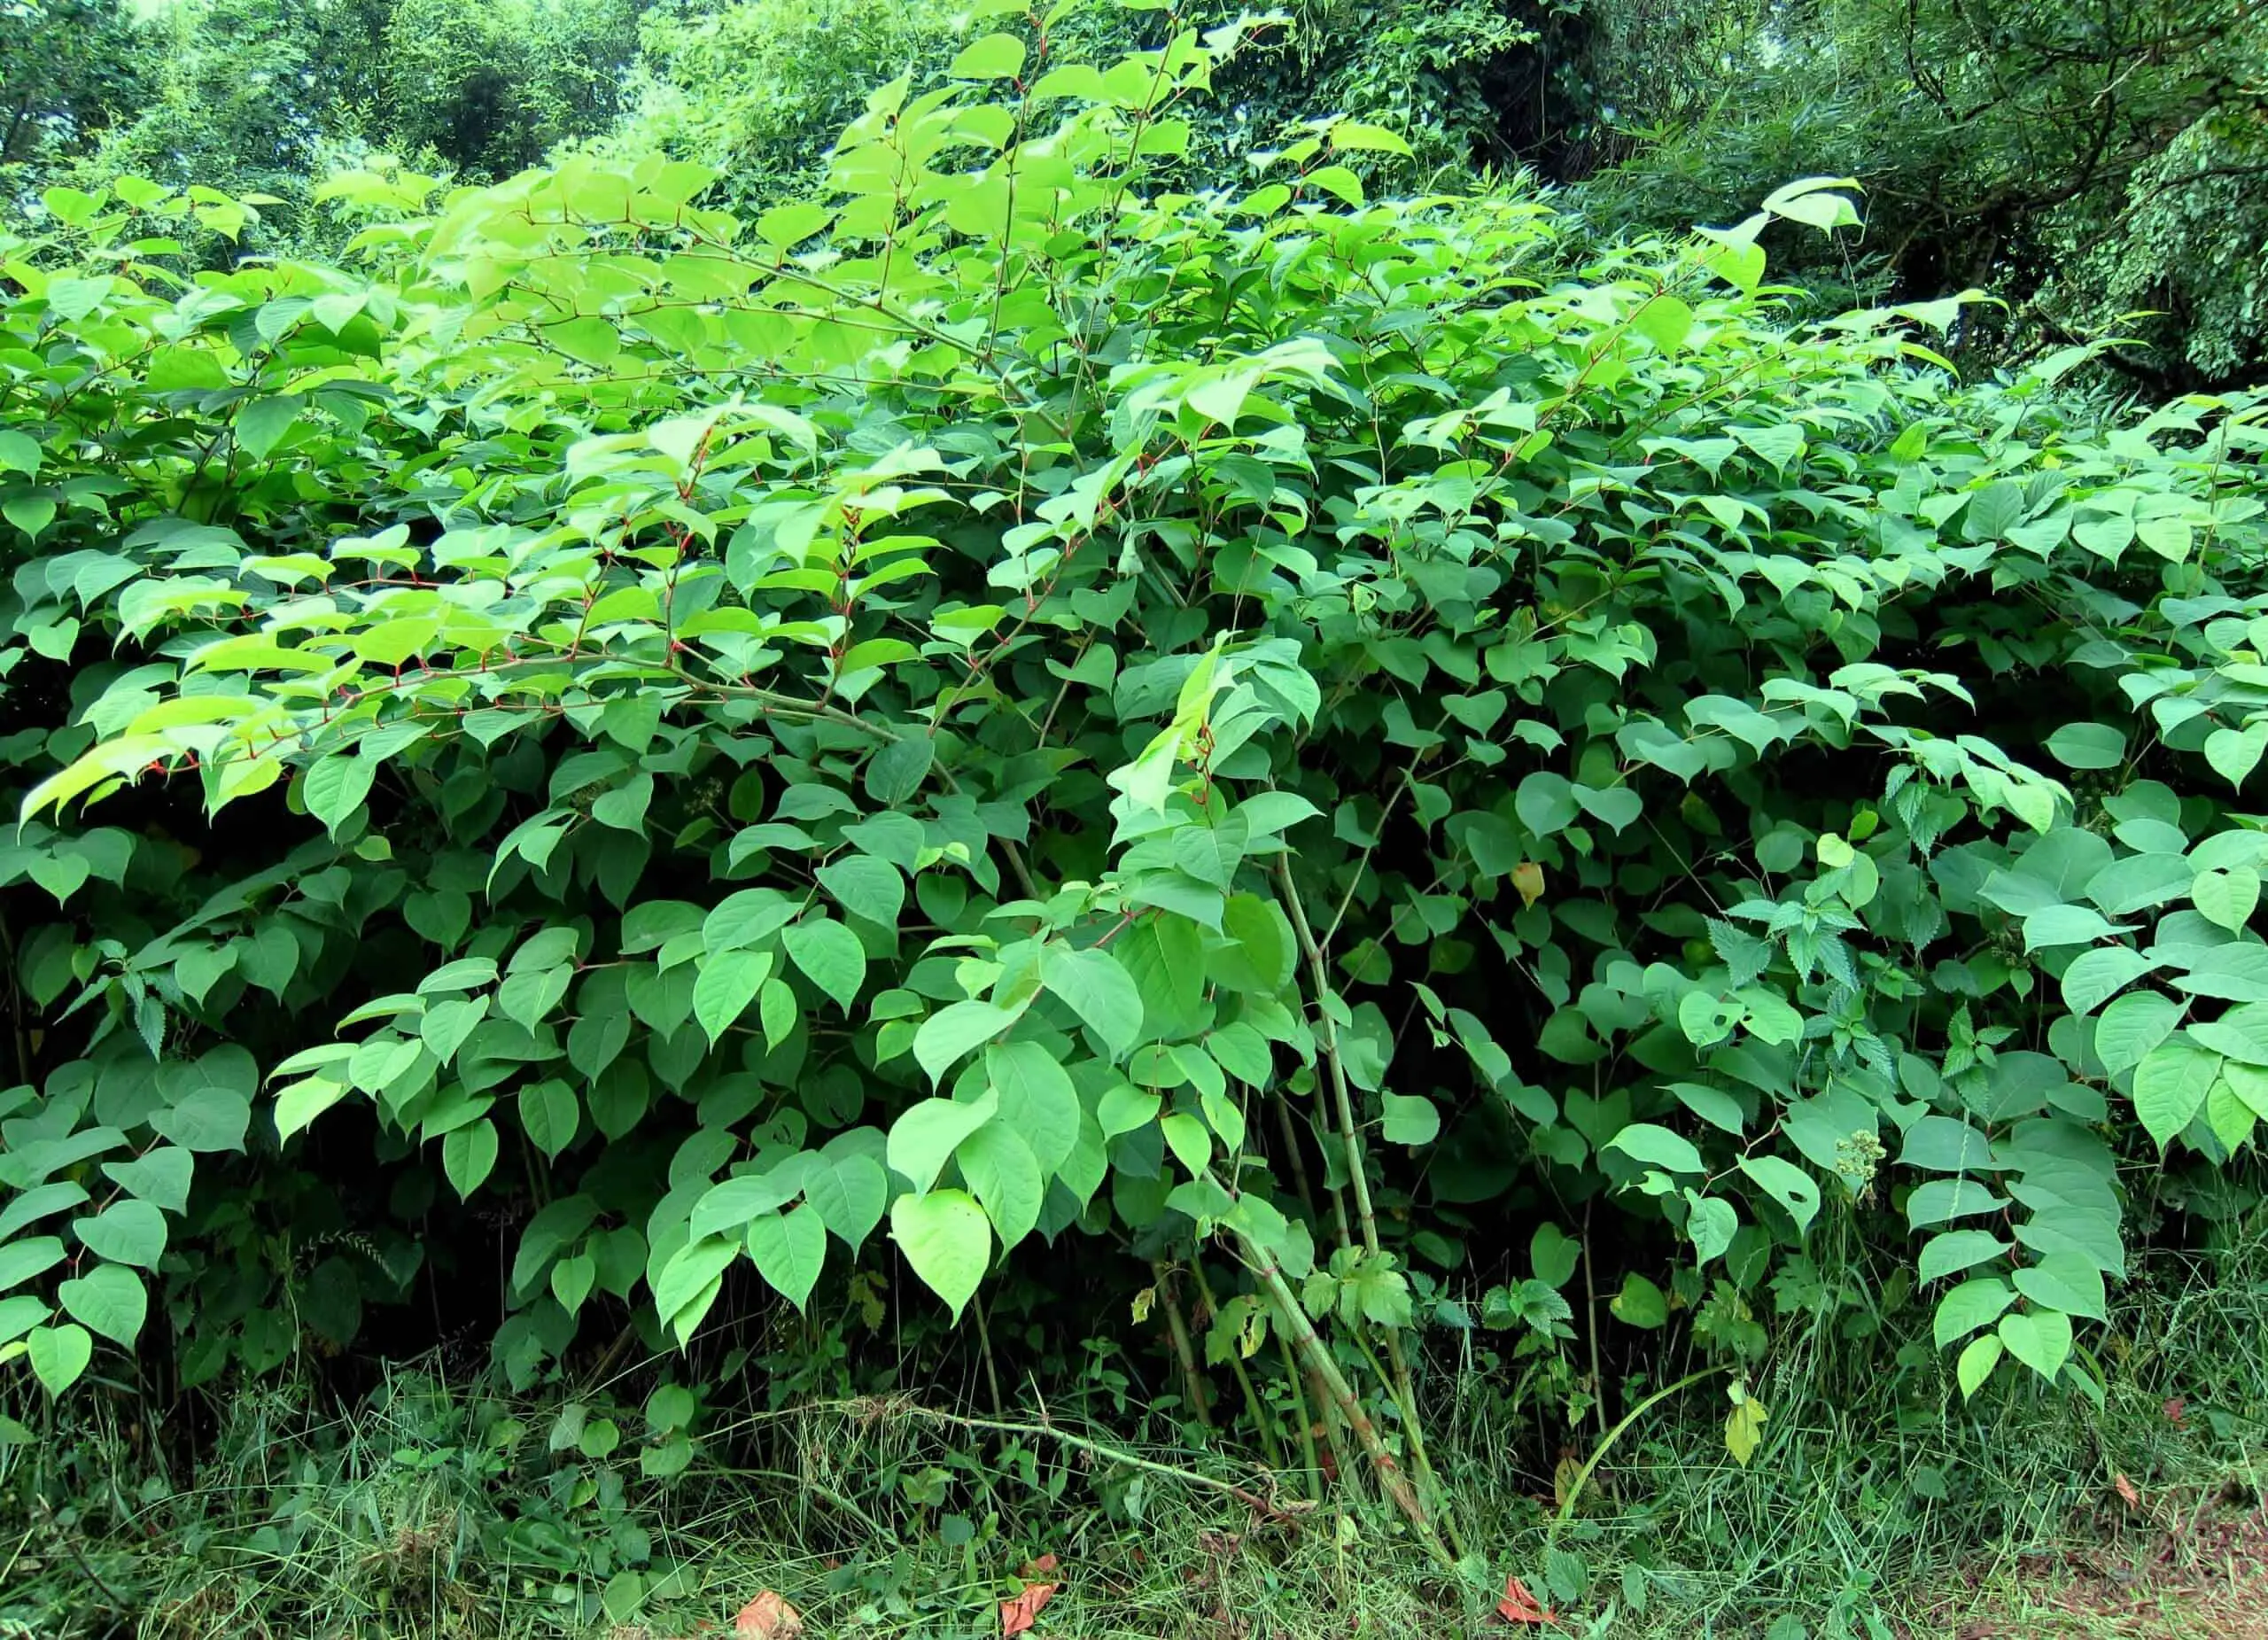 Japanese knotweed identification to be better informed in deciding what course of action to take